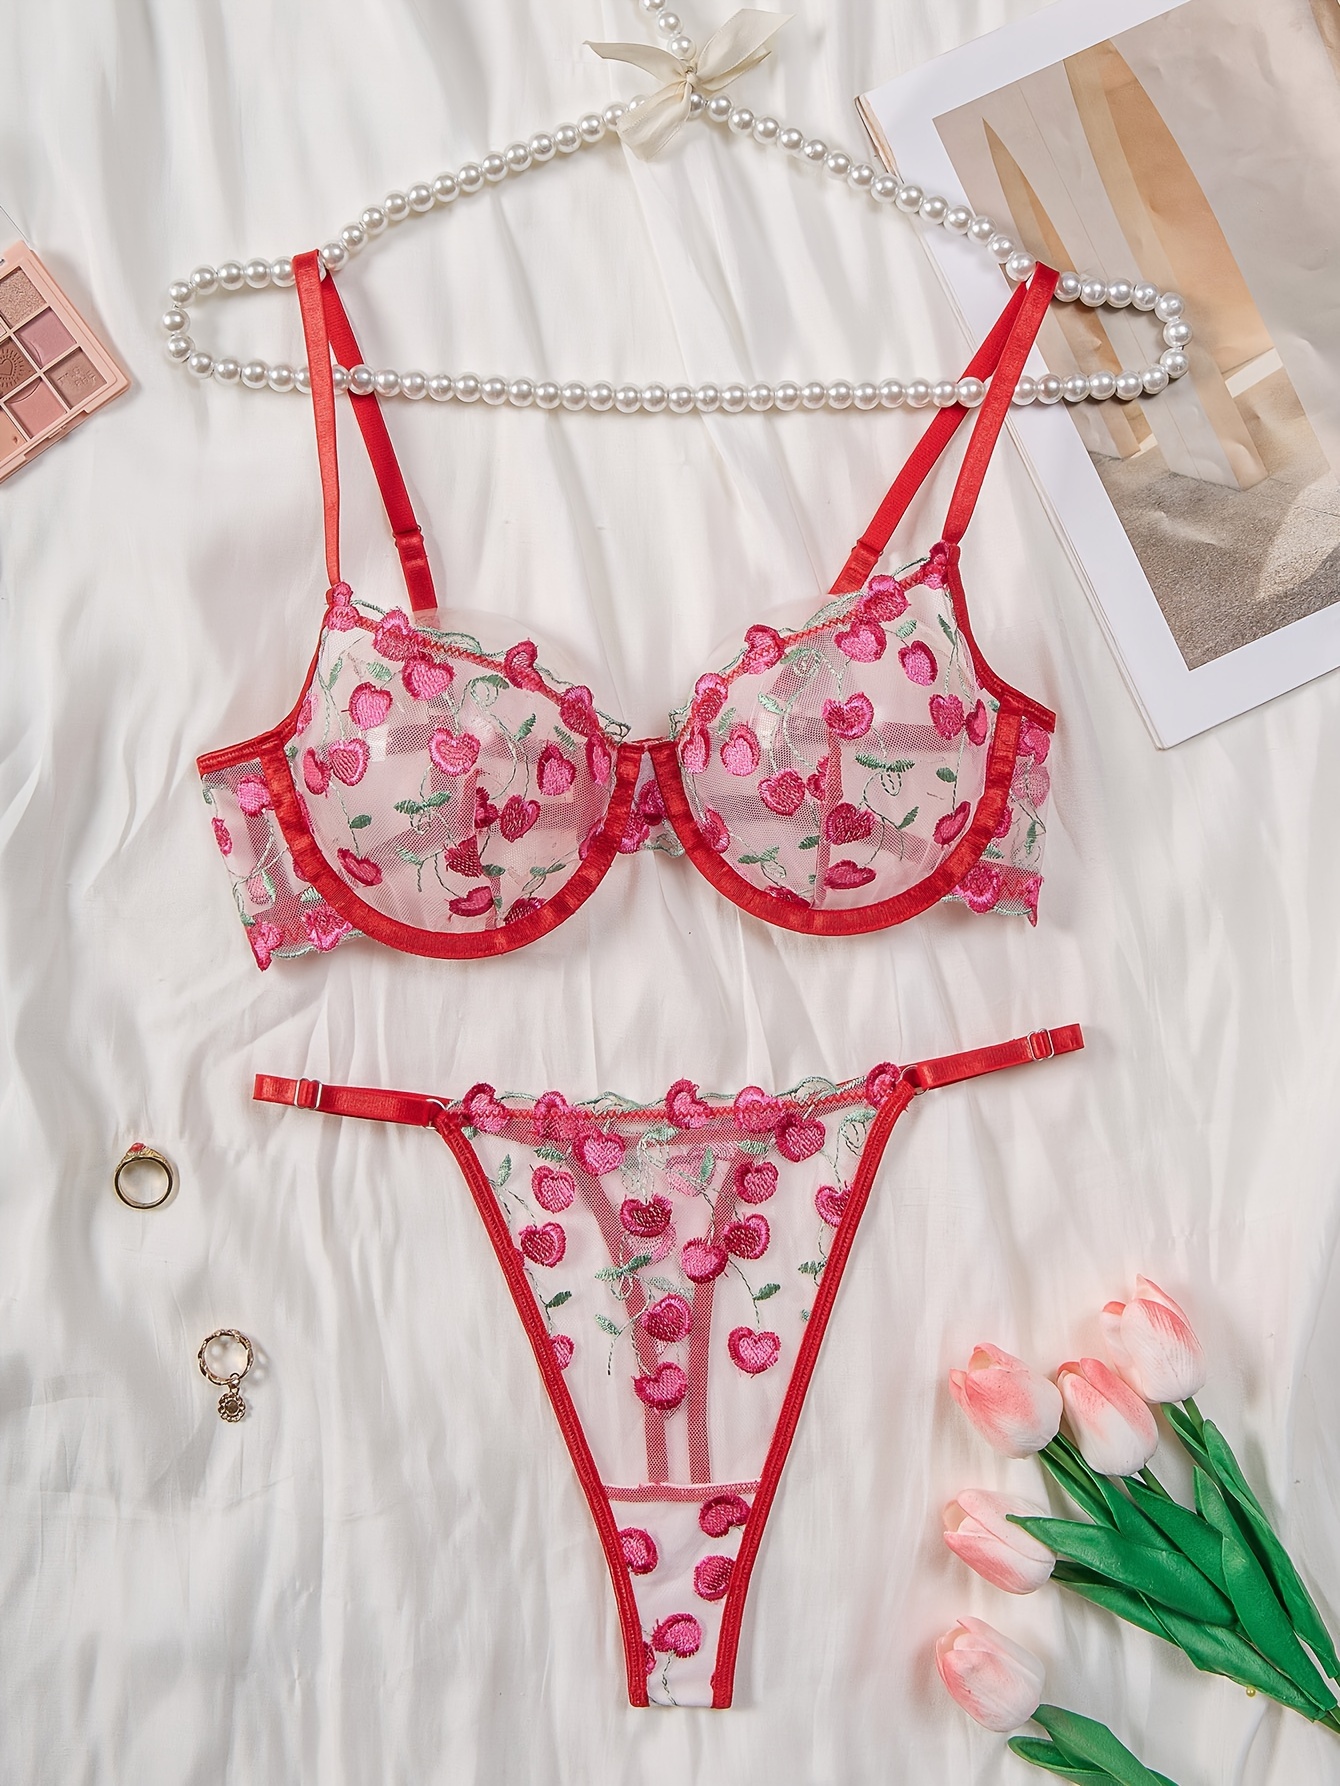 Buy STROWBERRY Printed Seamless Cup Lingerie Set Regular Use Bra